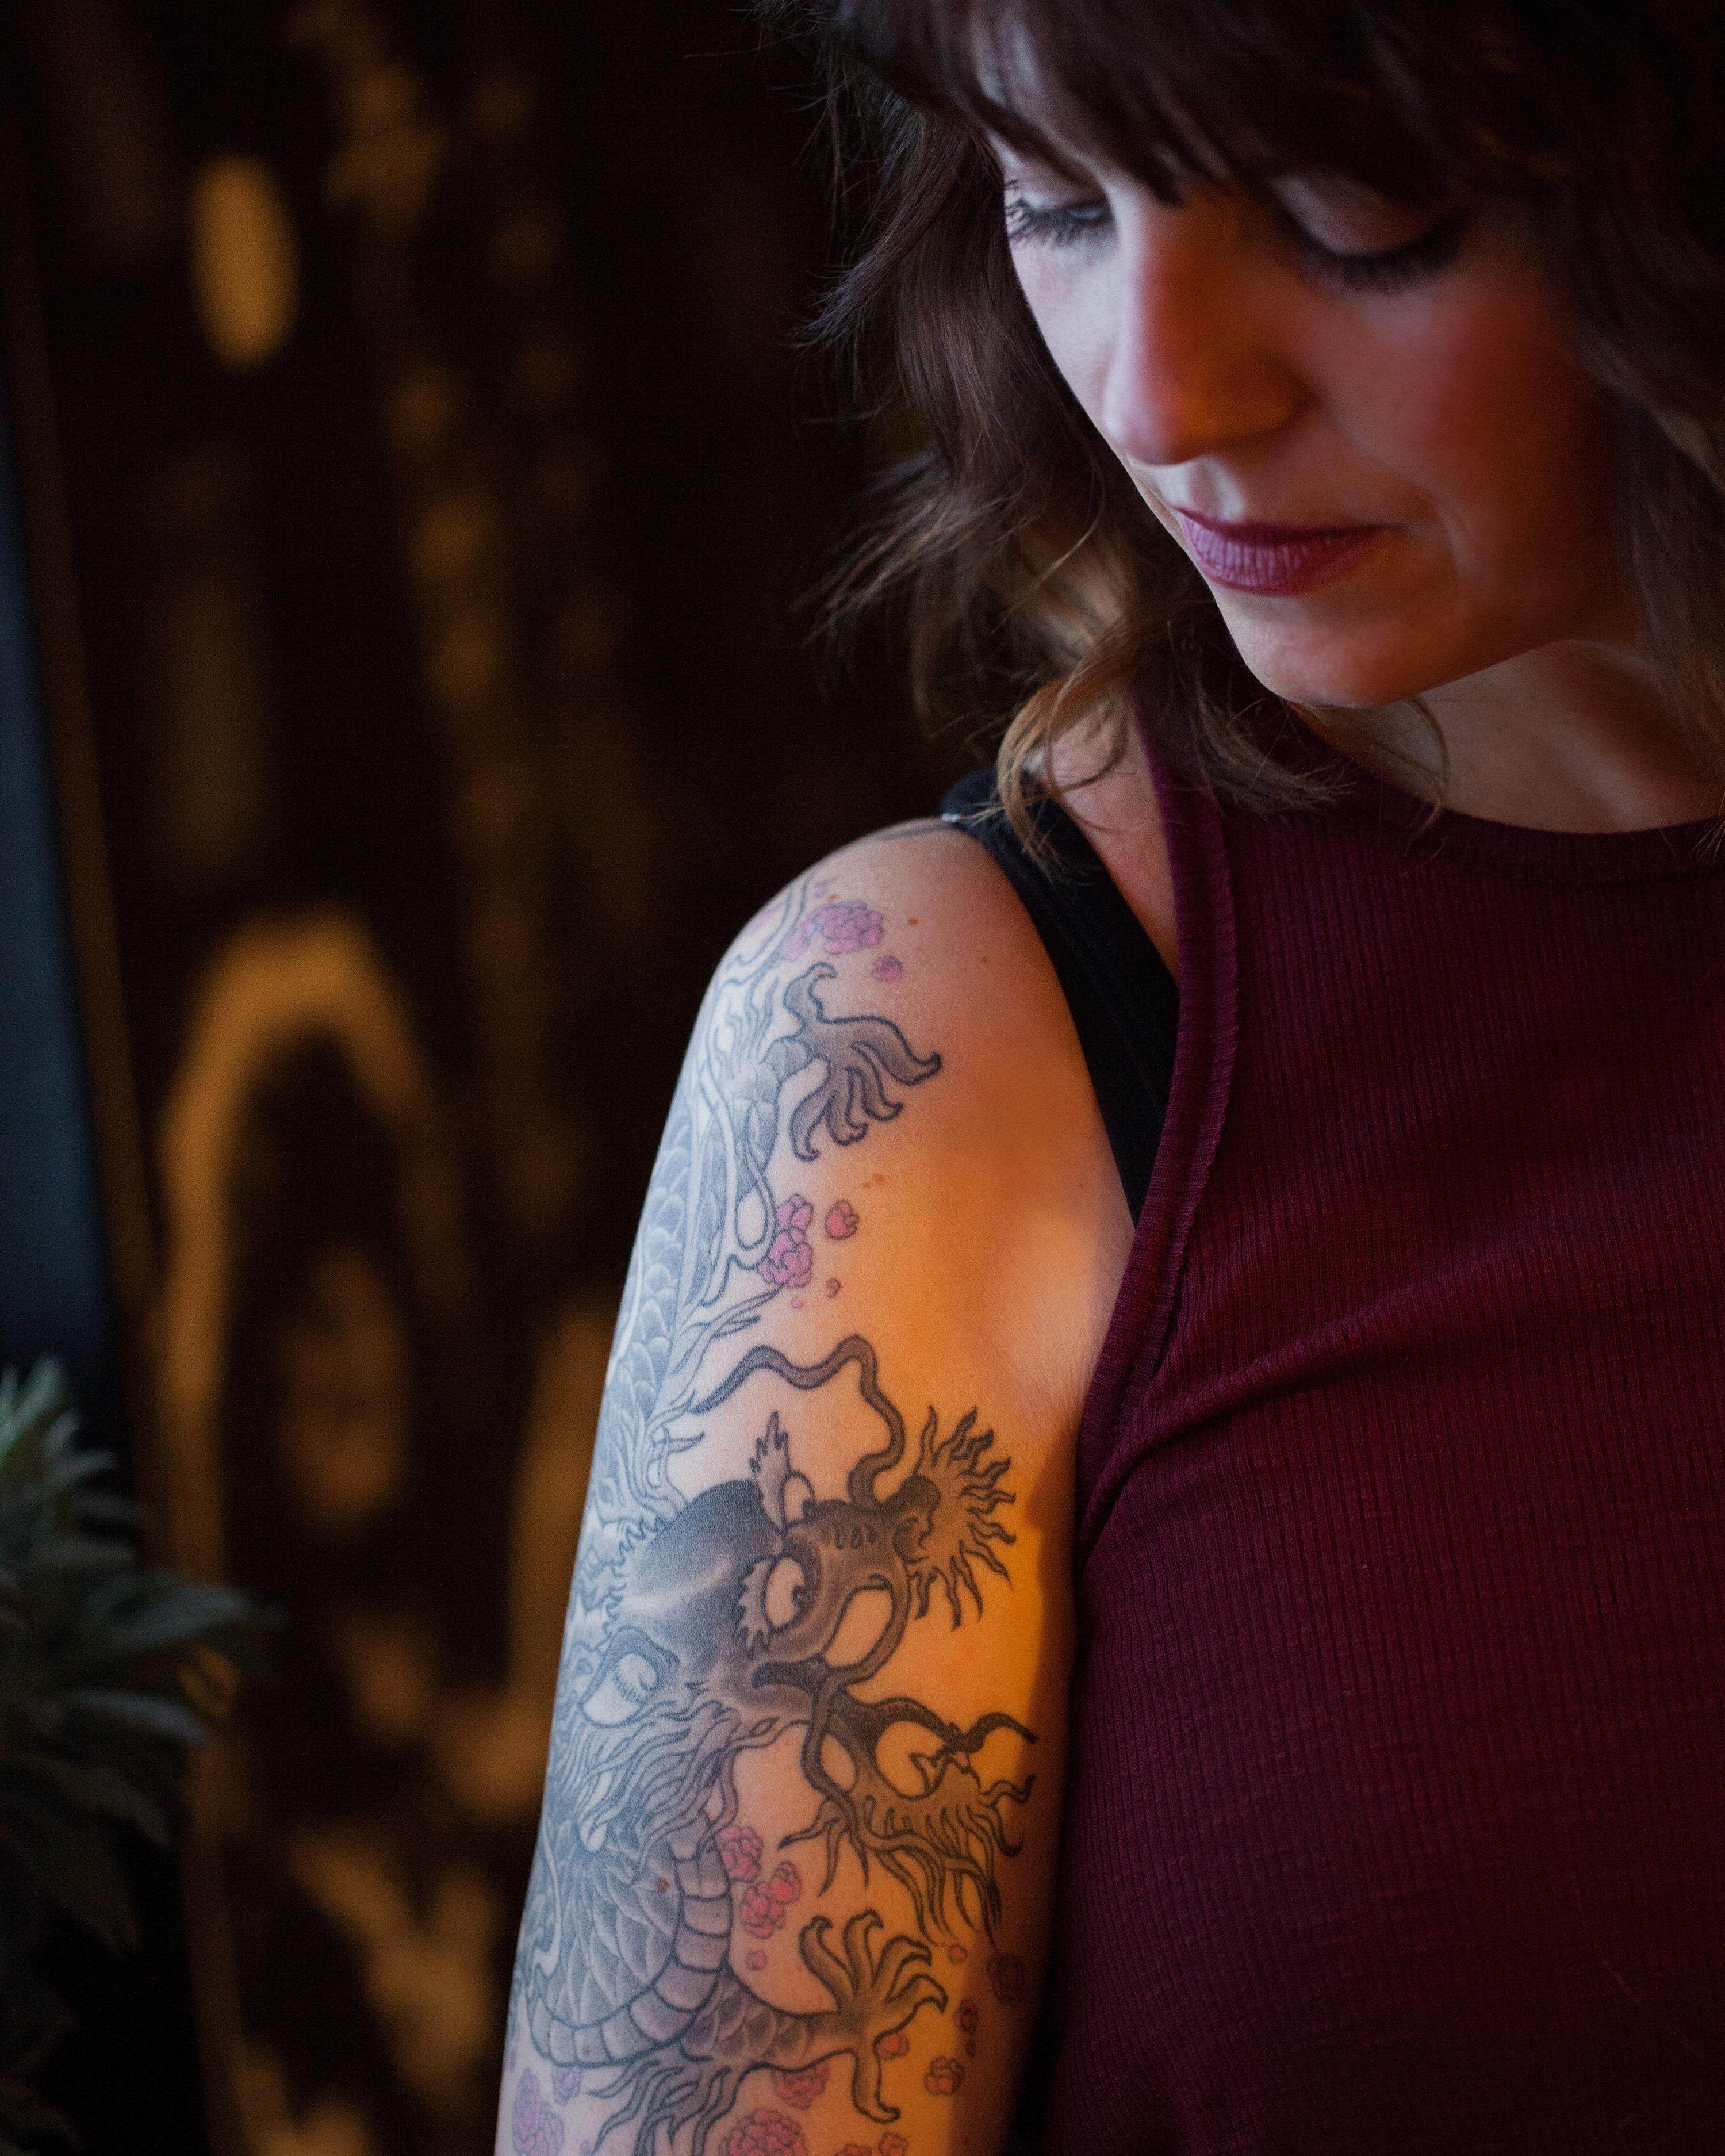 In an artistic portrait, a feminine person with curled brown hair looks down and to their right. Their exposed arm has a large, prominent tattoo of a Chinese-style dragon.